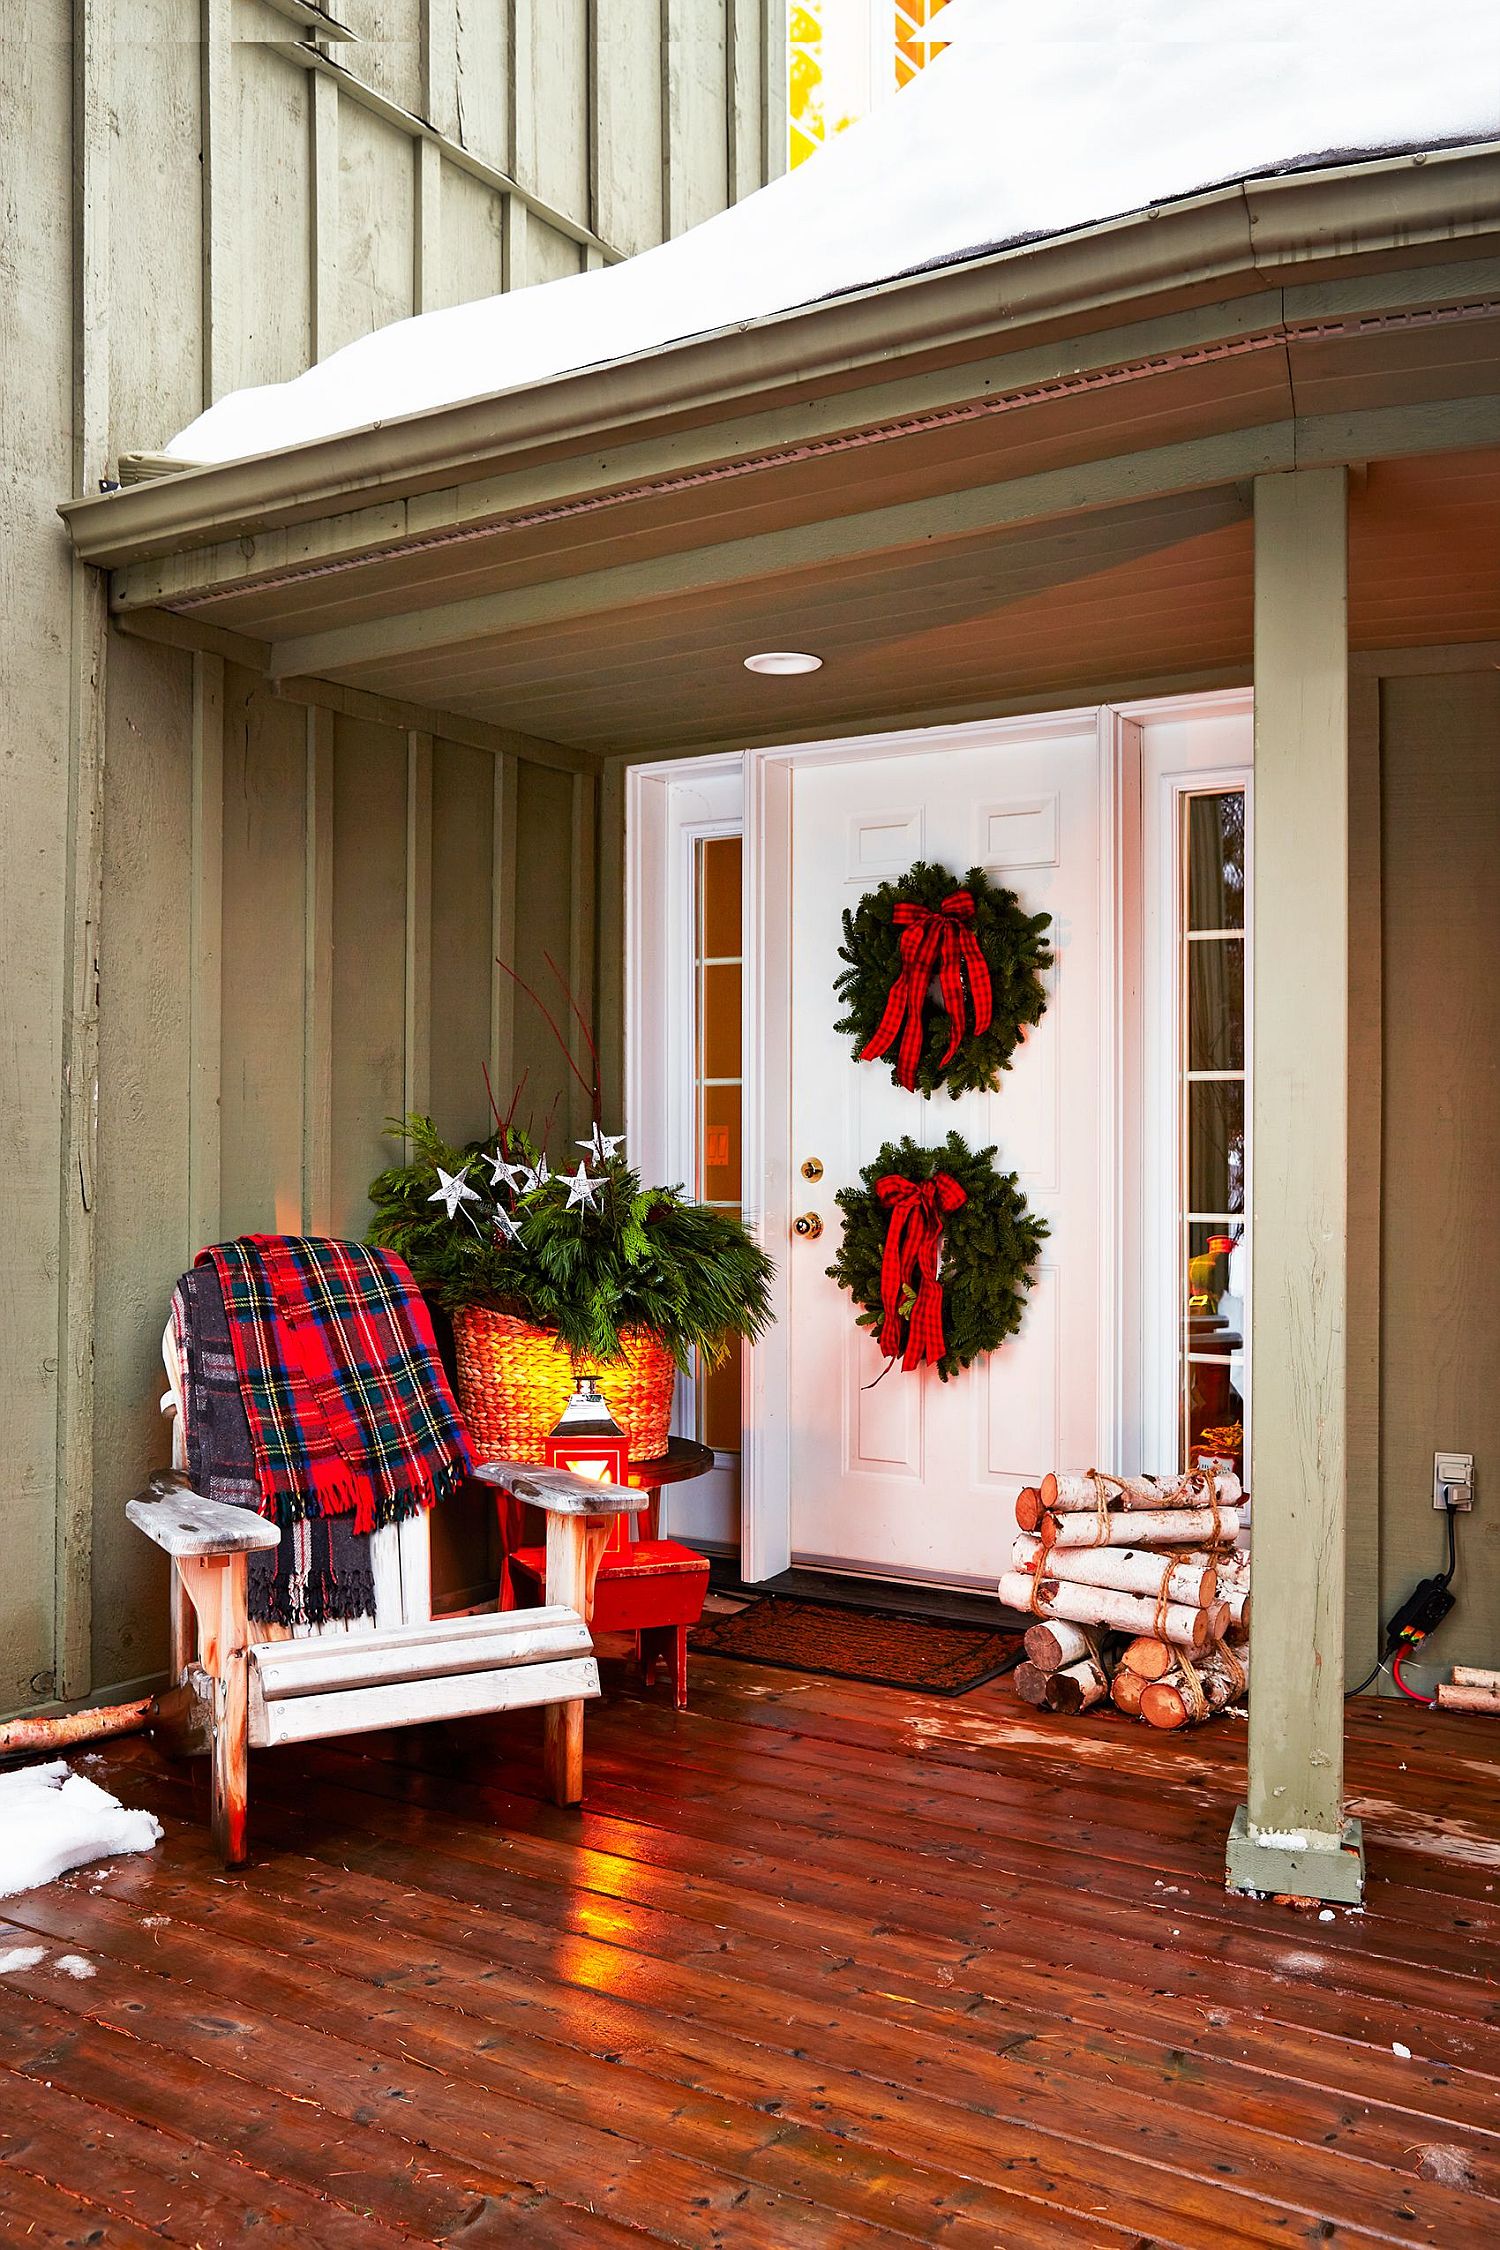 Try out what works best in your own front porch depending on scale and size